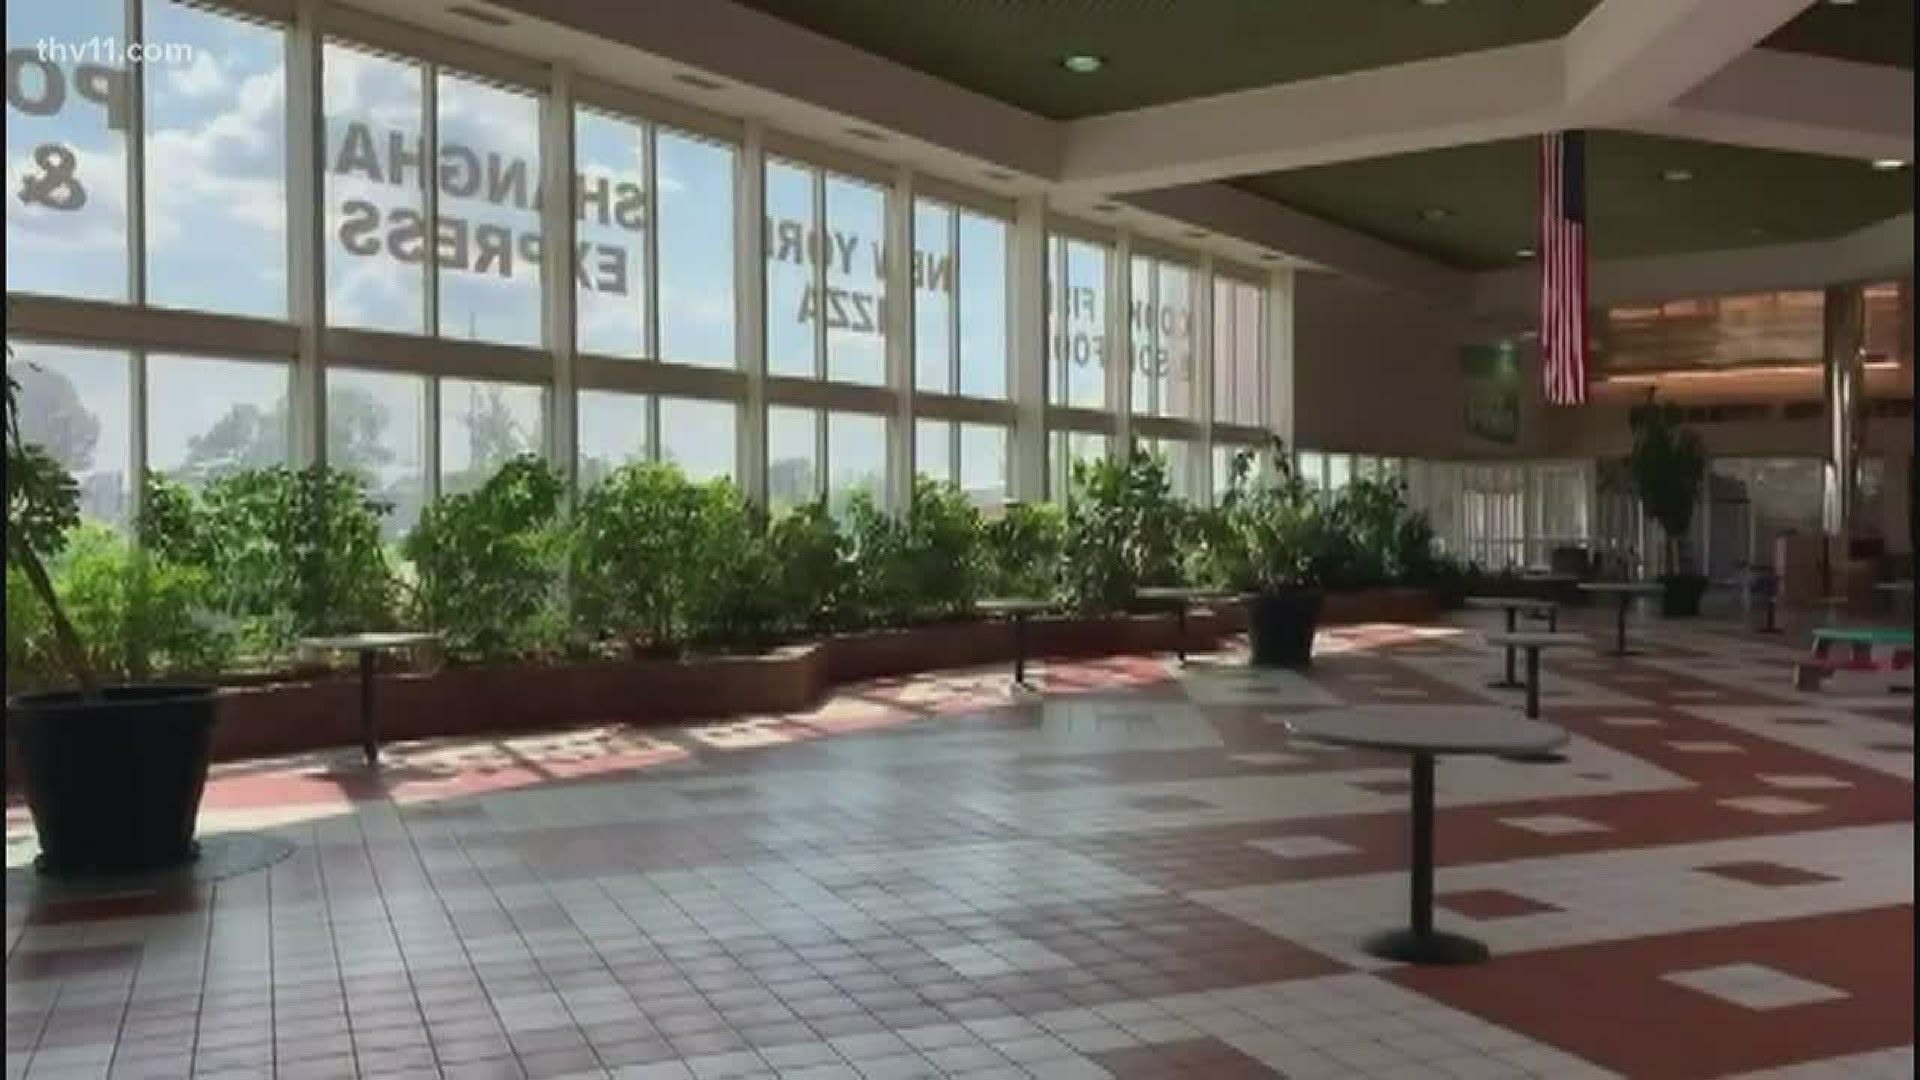 Pines Mall closed its doors for good Sunday after struggling for years.